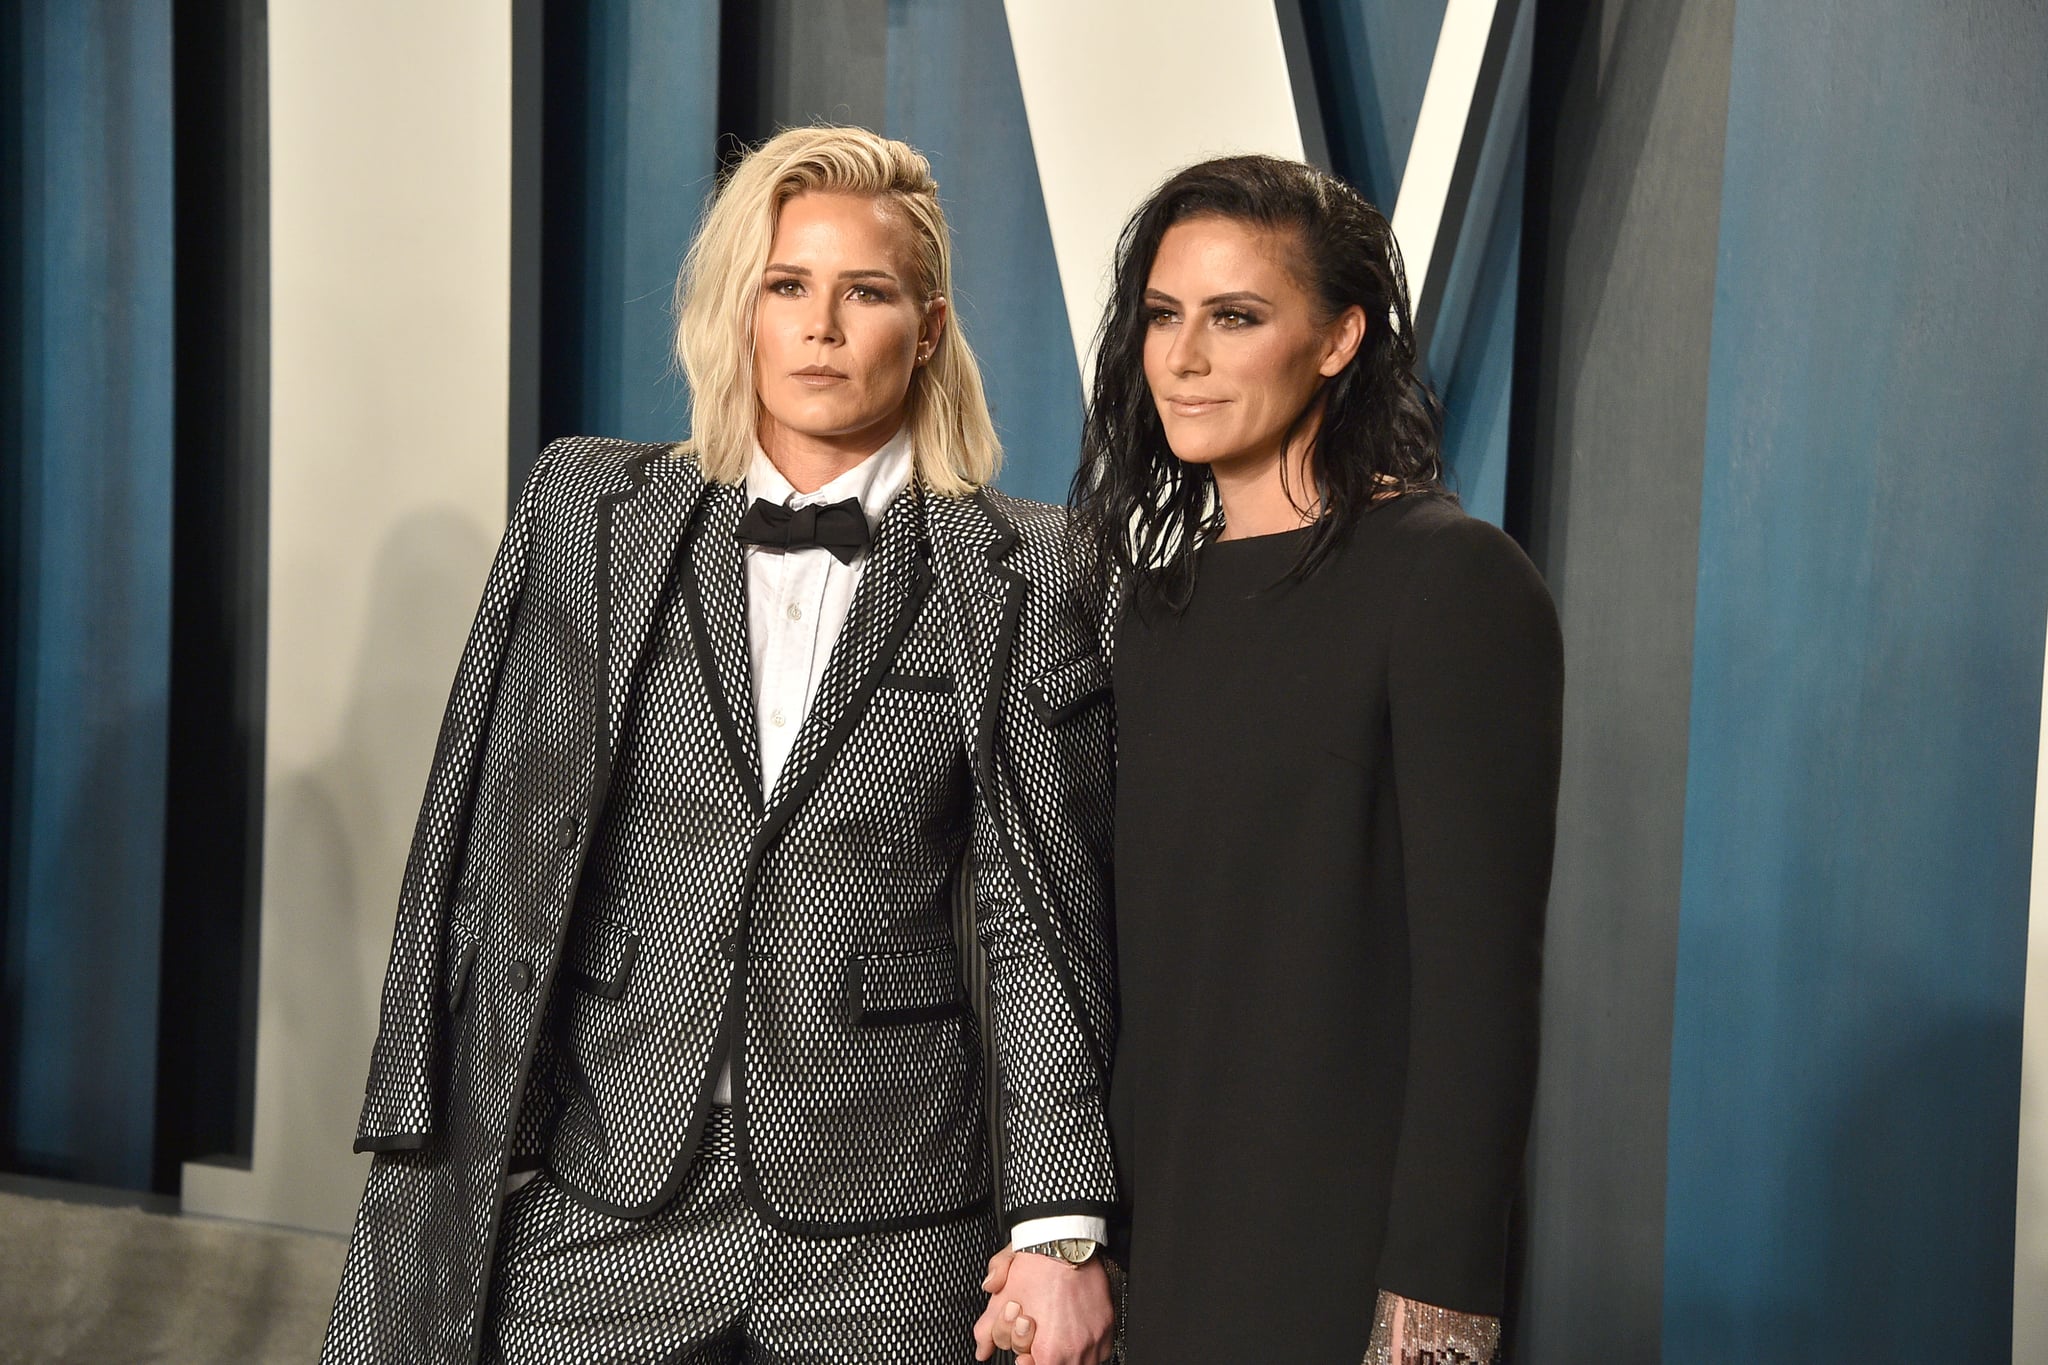 Football players Ashlyn Harris and Ali Krieger attend the 2020 Vanity Fair Oscar Party at Wallis Annenberg Centre for the Performing Arts on February 09, 2020 in Beverly Hills, California. (Photo by David Crotty/Patrick McMullan via Getty Images)